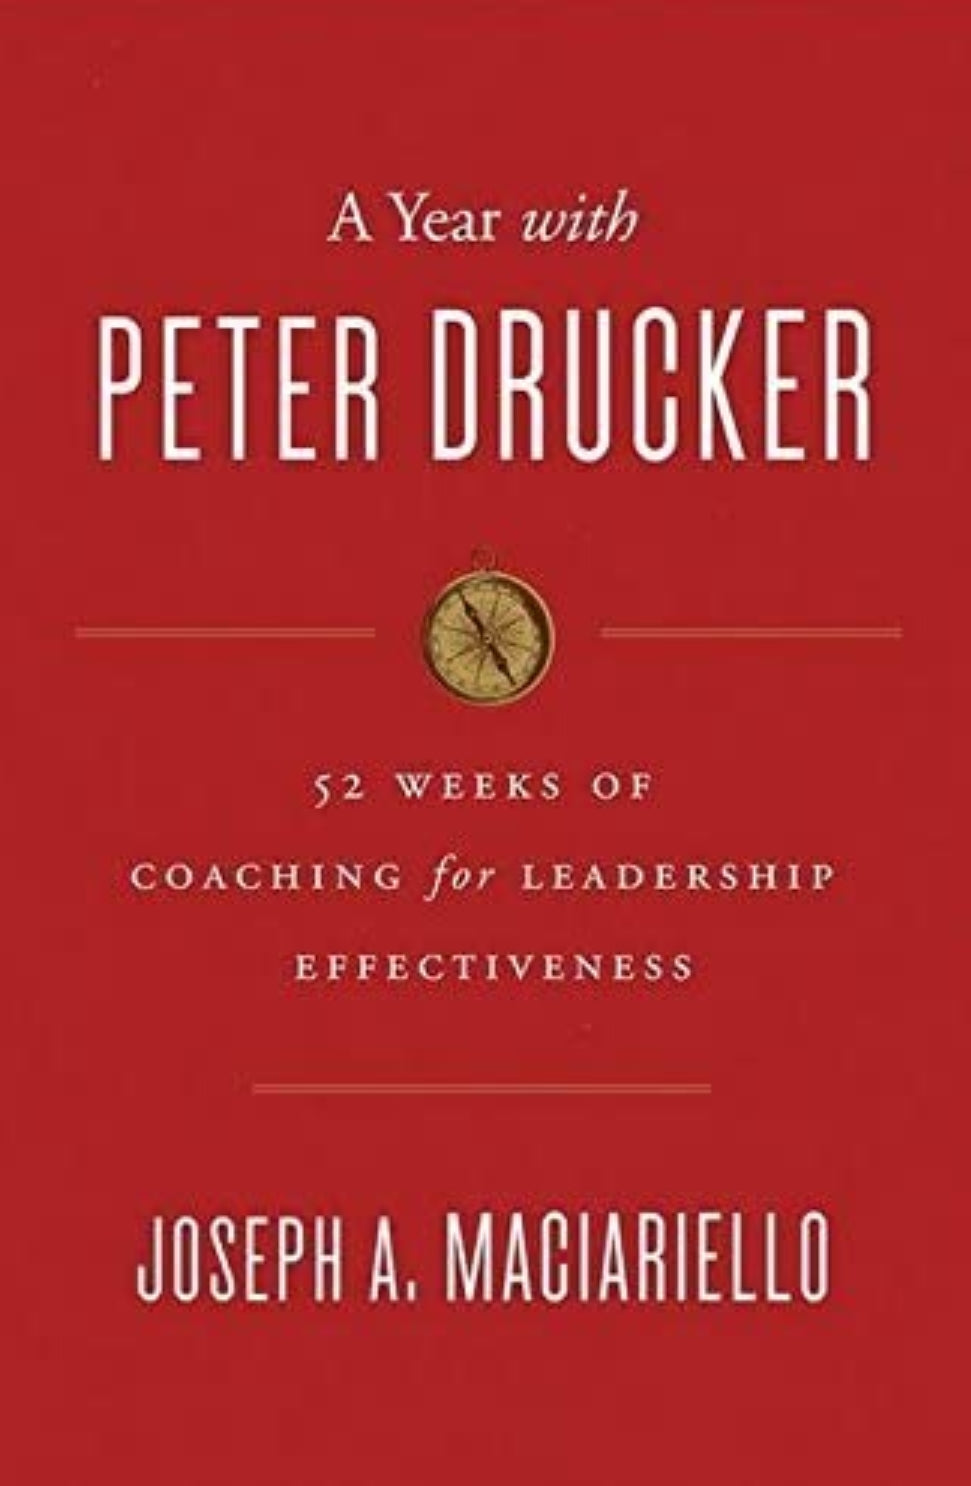 *A Year With Peter Drucker